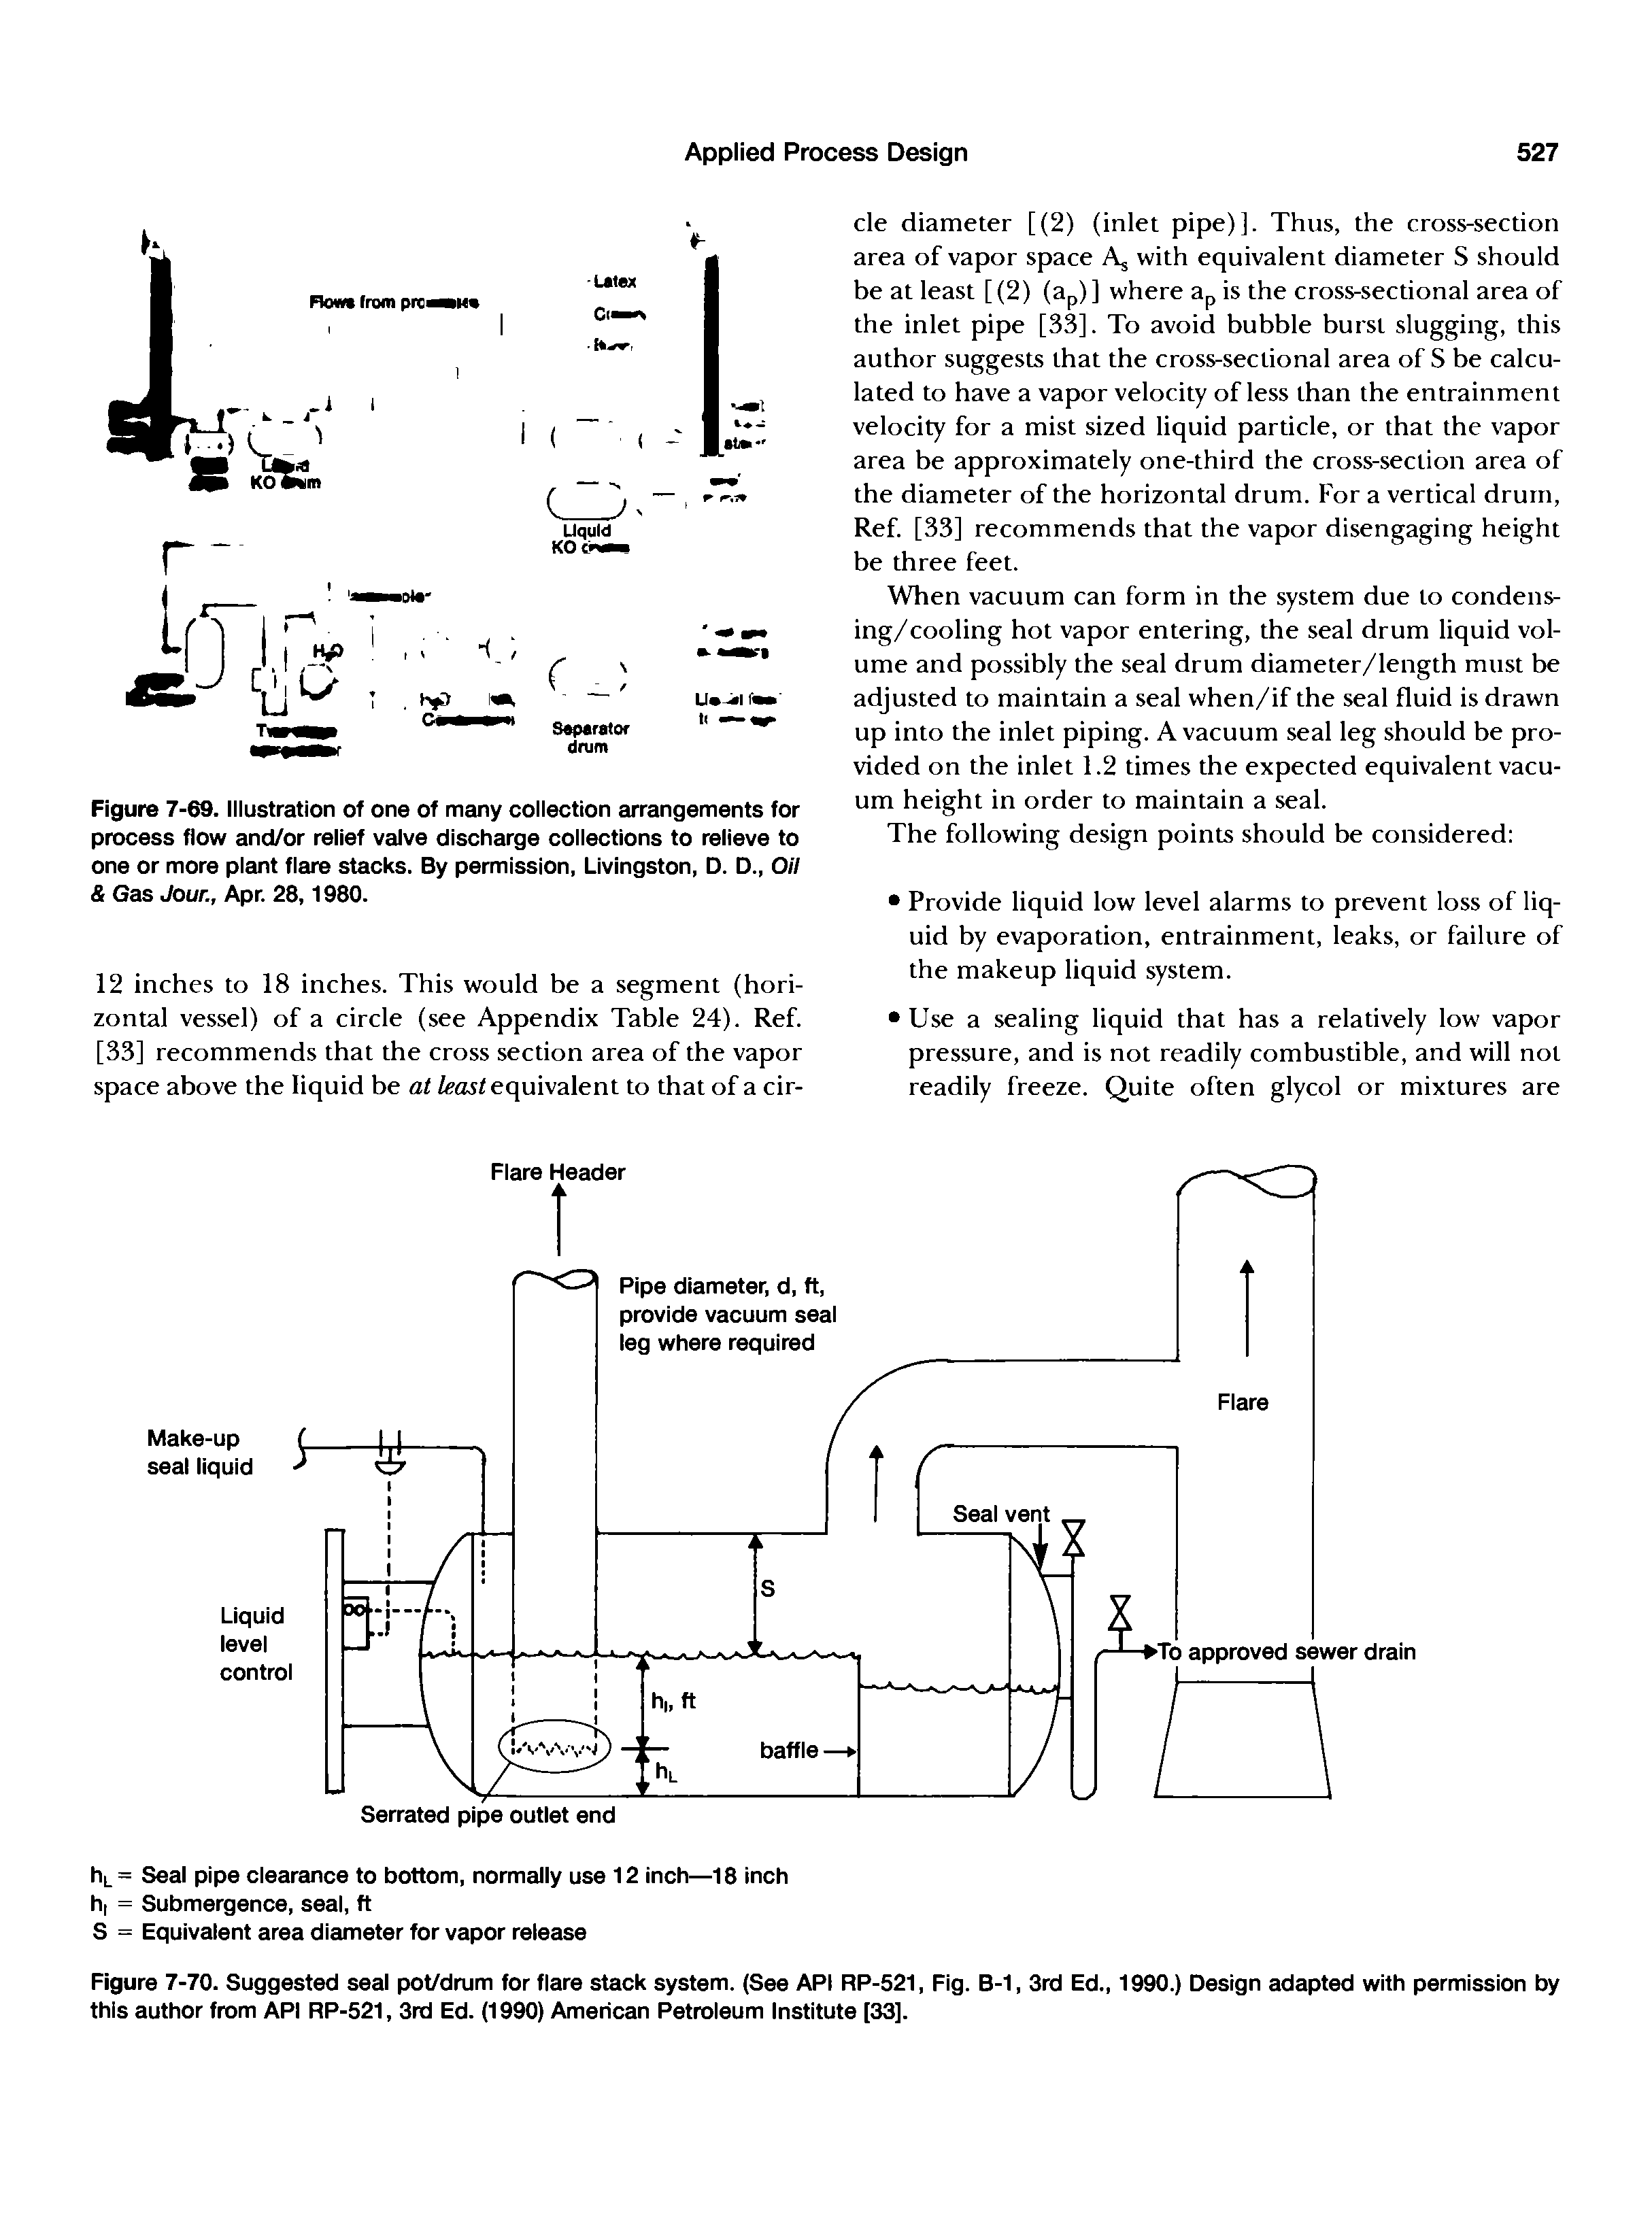 Figure 7-70. Suggested seal pot/drum for flare stack system. (See API RP-521, Fig. B-1, 3rd Ed., 1990.) Design adapted with permission by this author from API RP-521, 3rd Ed. (1990) American Petroleum Institute [33].